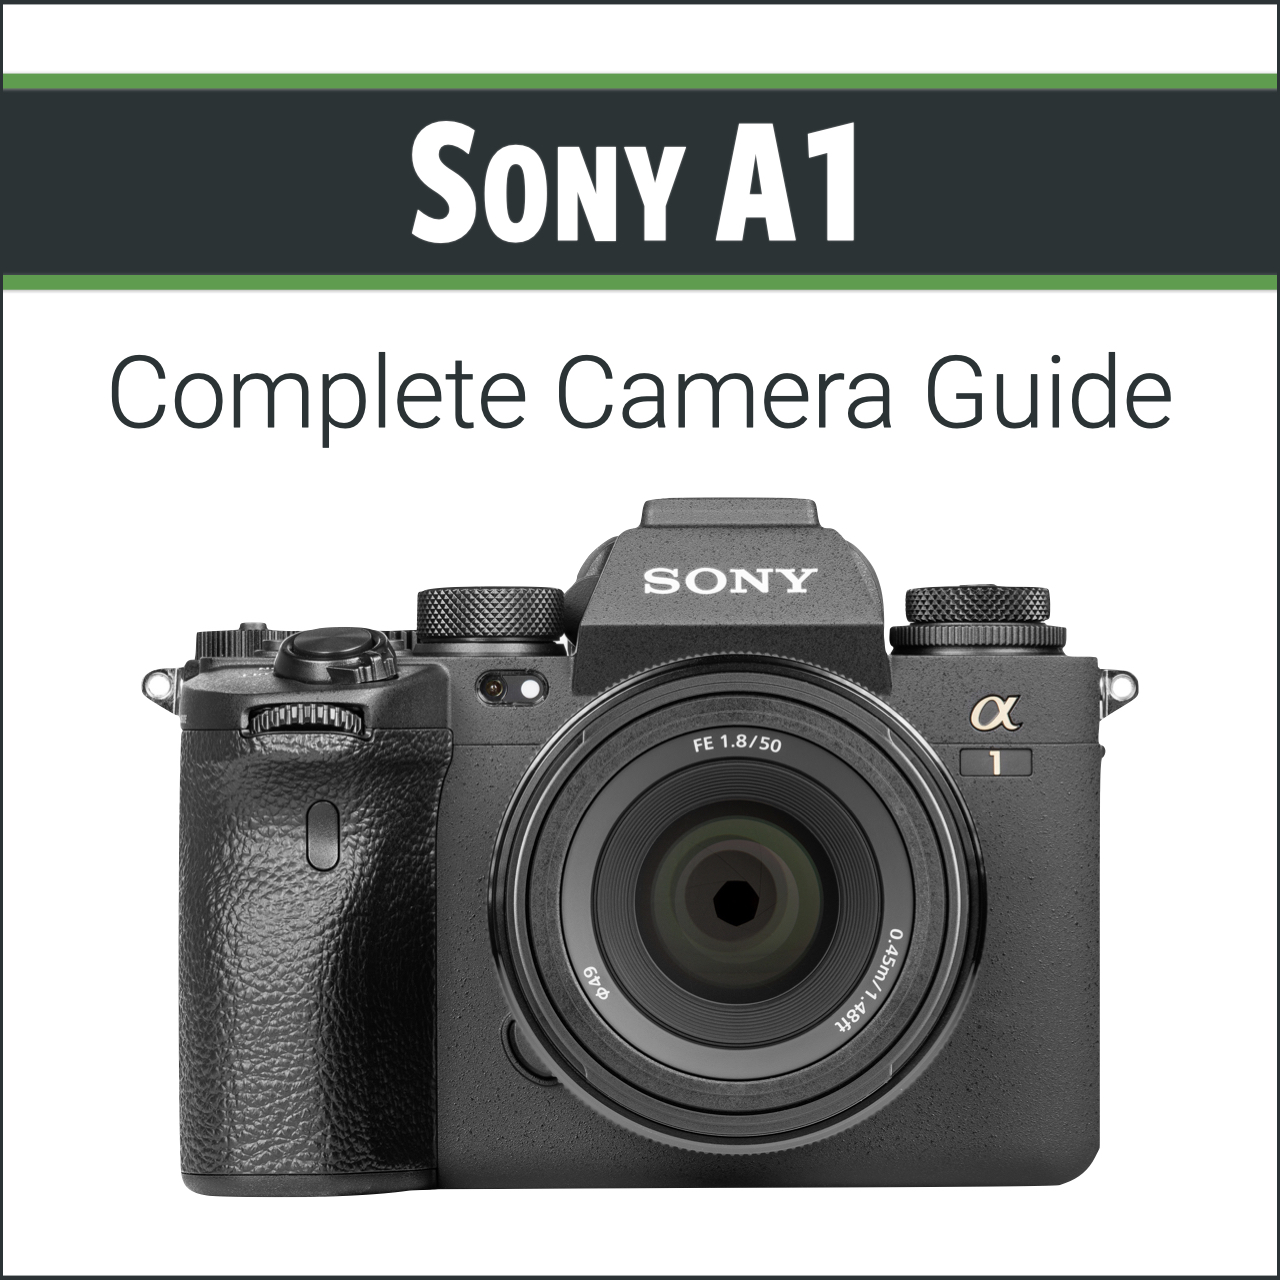 Sony A1: Complete Camera Guide